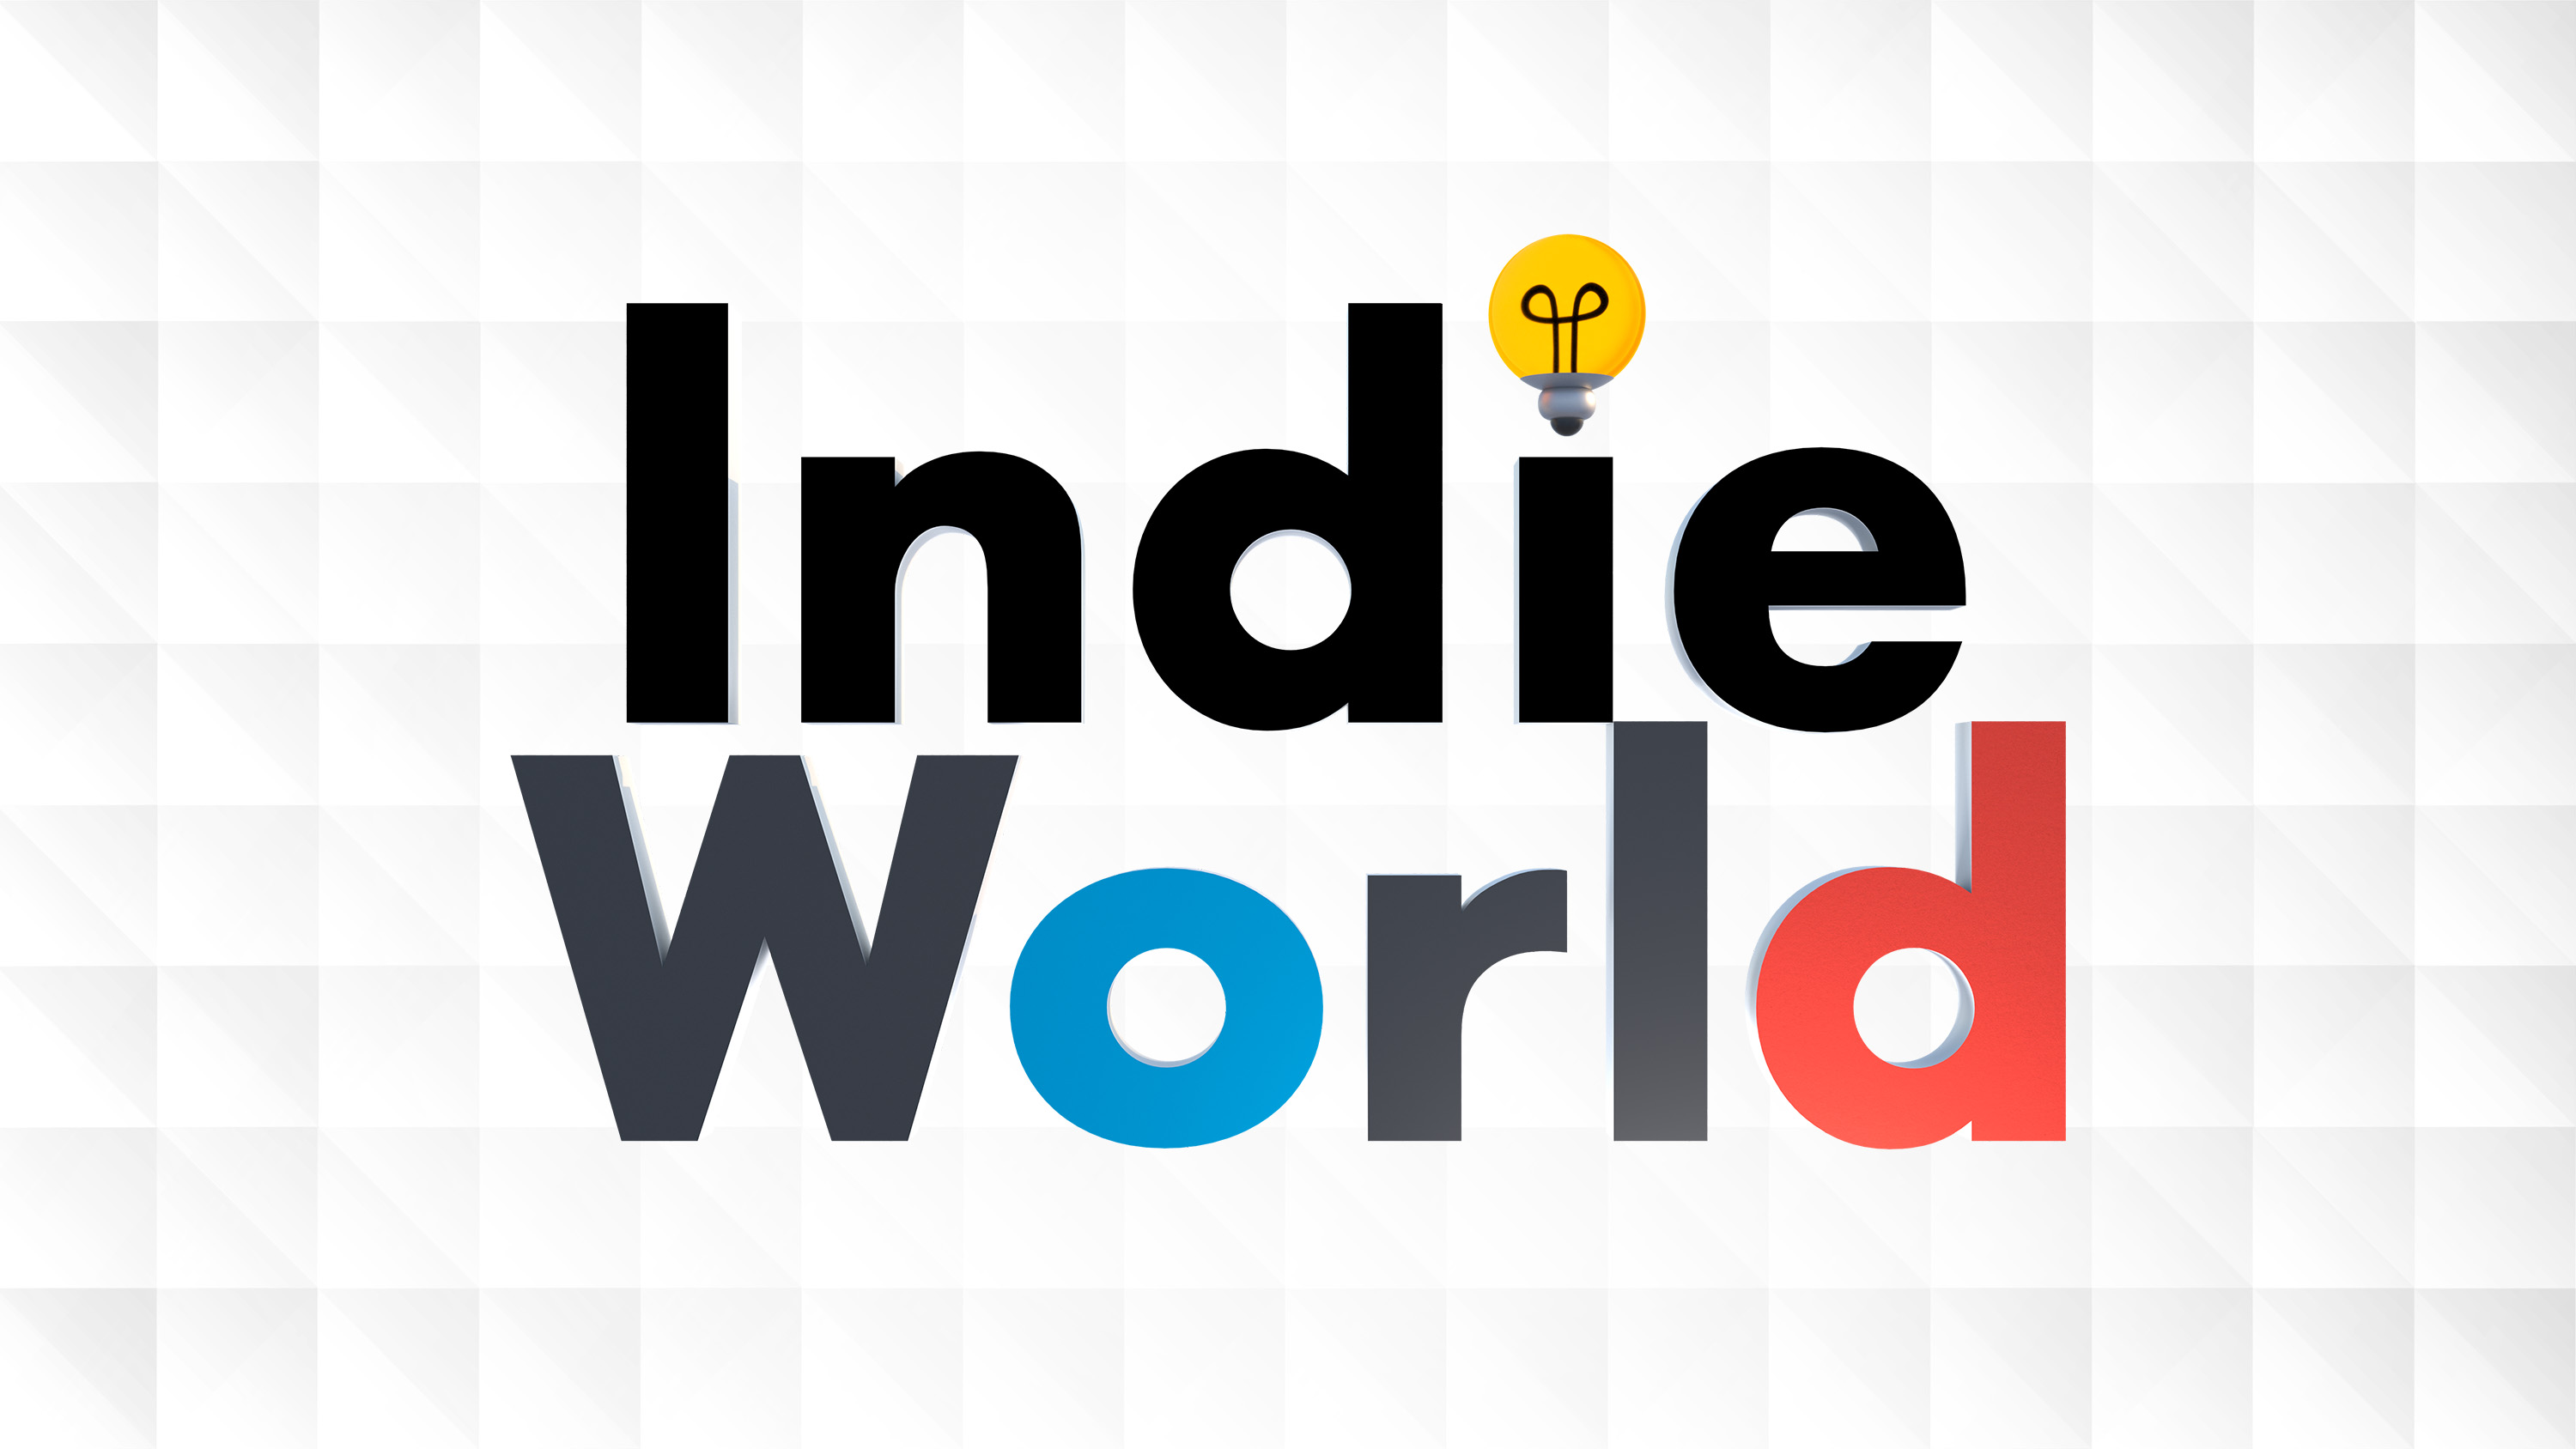 Nintendo Indie World May 2022 livestream announced for Wednesday